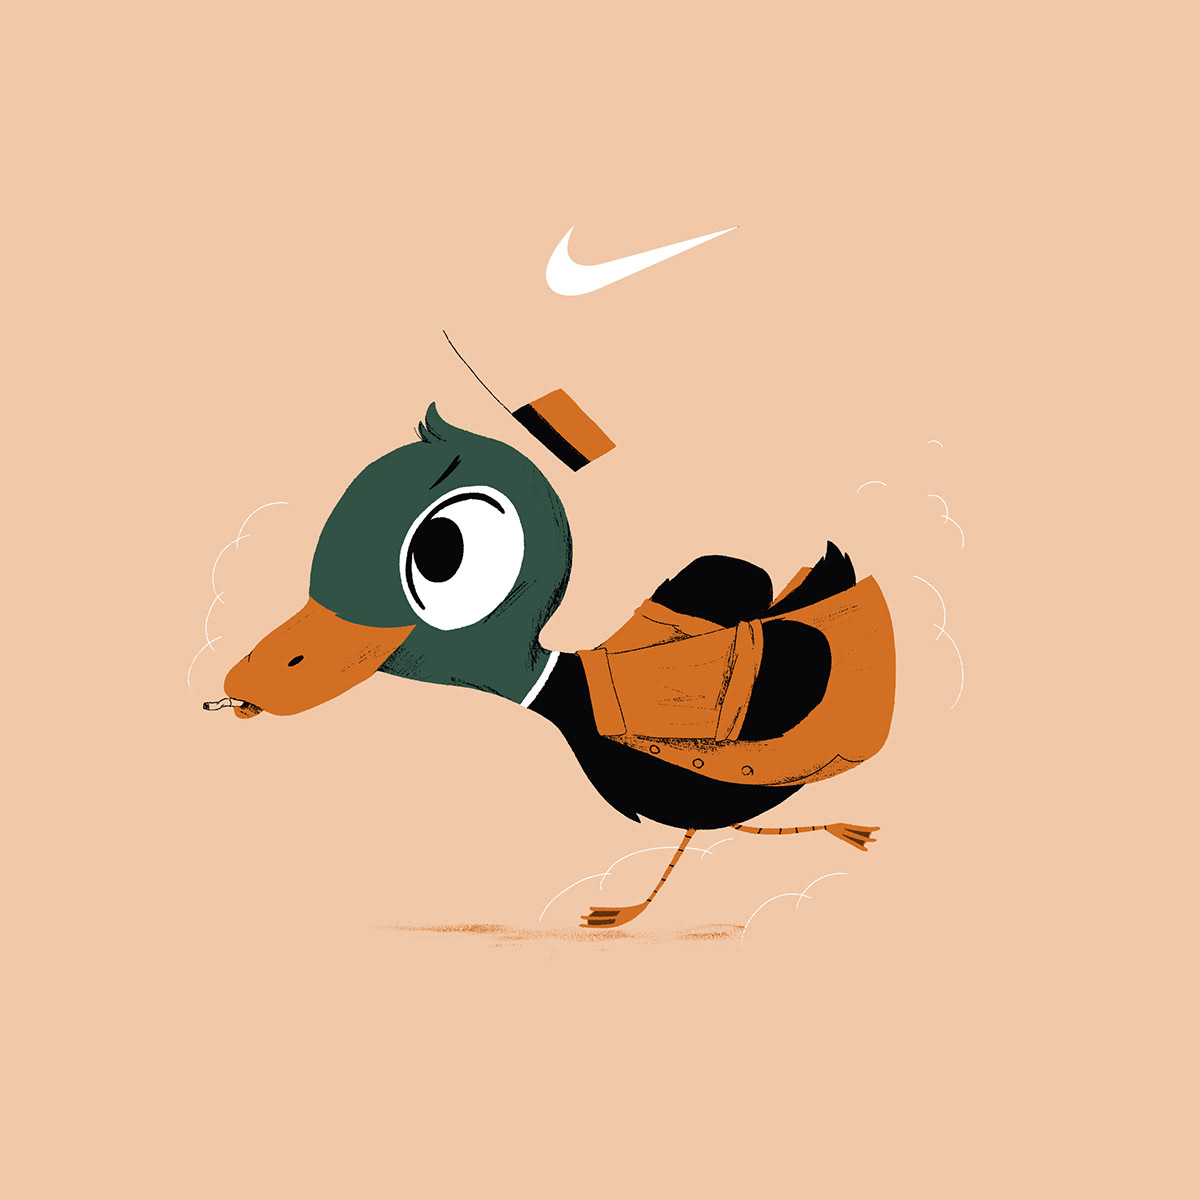 Cel Animation duck frame by frame istanbul minneapolis minnesota Nike shoes Turkey Ugly duckling